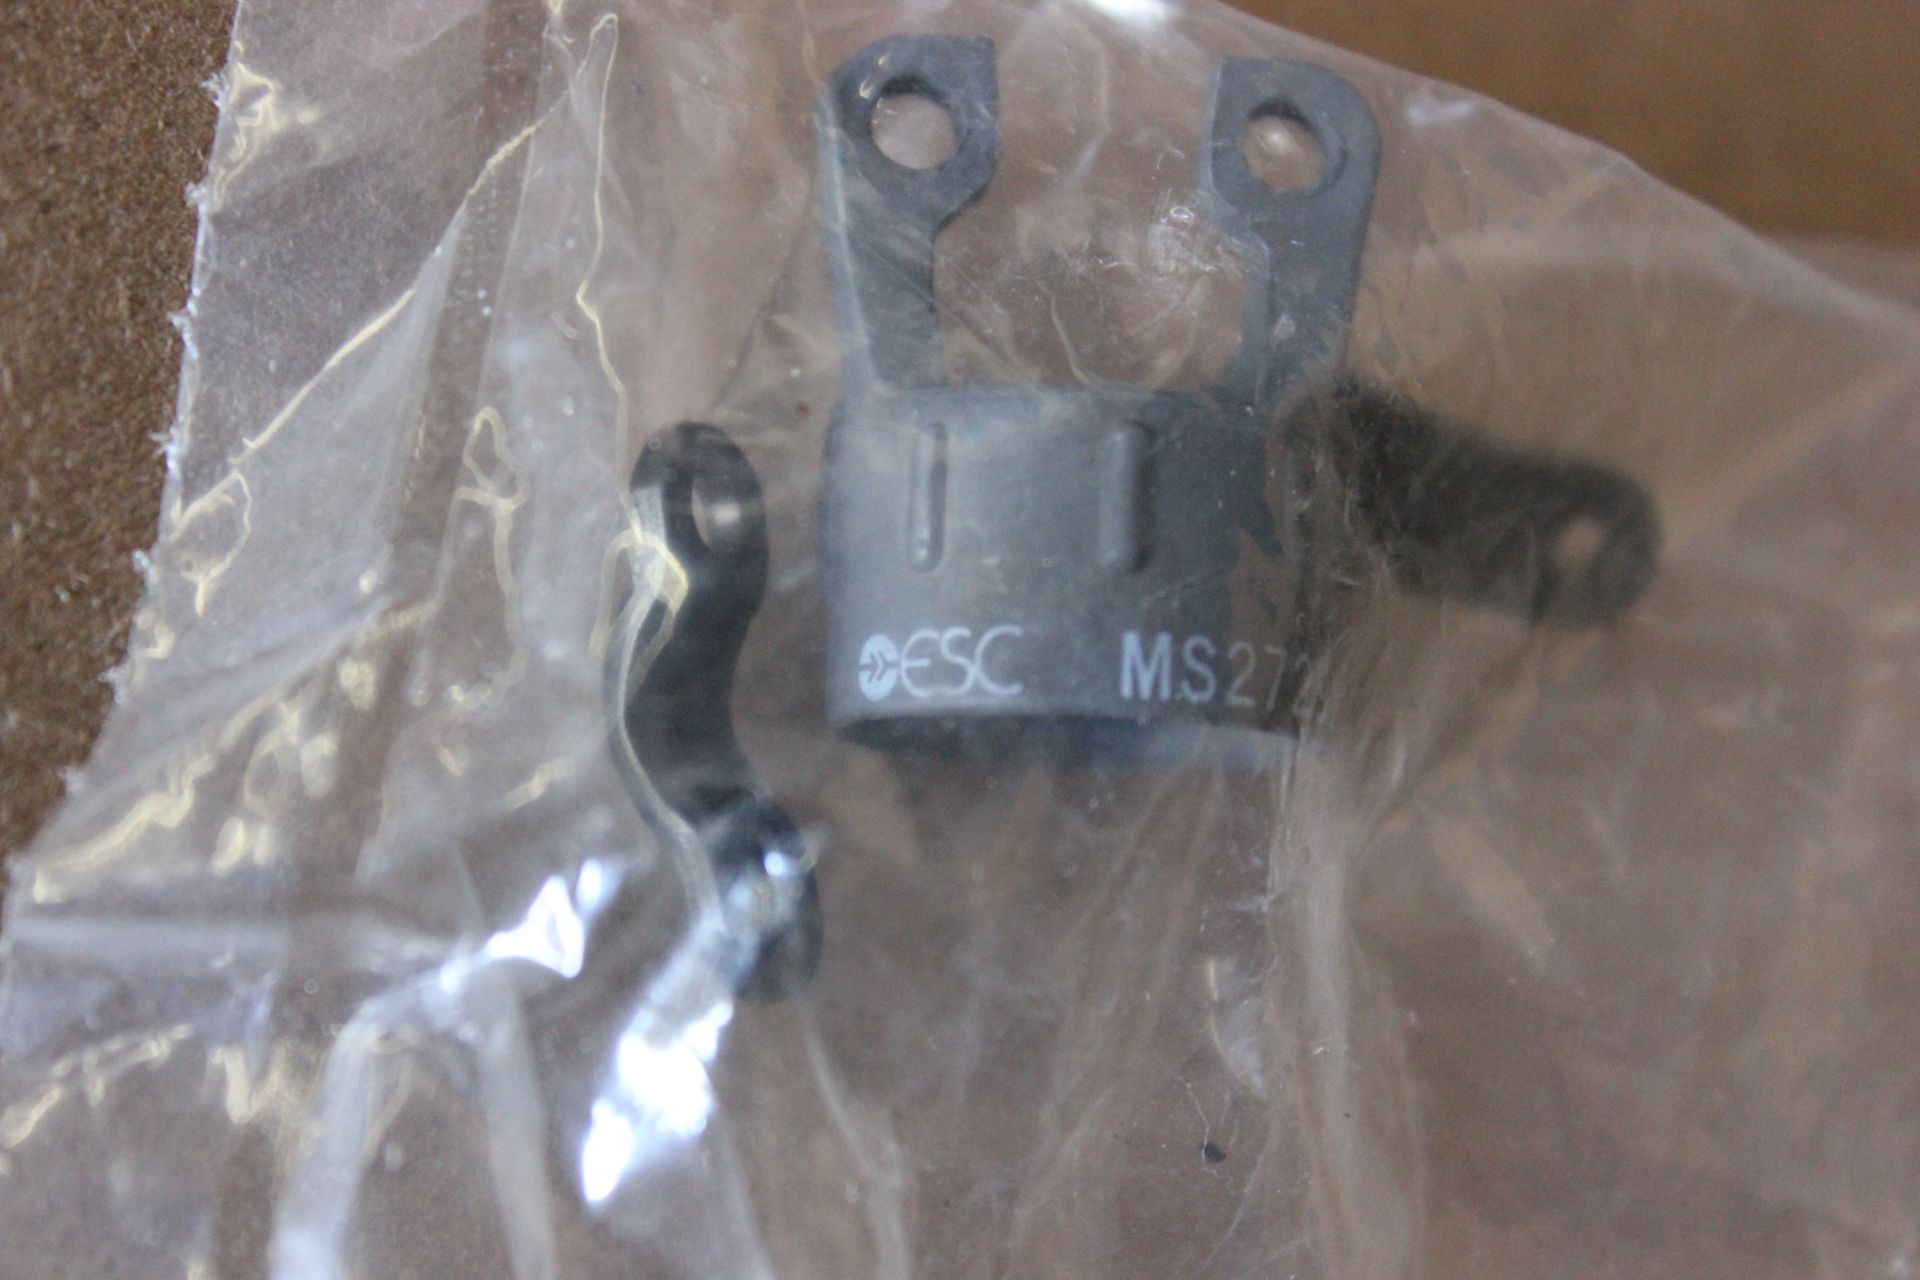 LOT OF NEW ESC MILITARY SPEC CONNECTOR STRAIN RELIEFS - Image 5 of 8